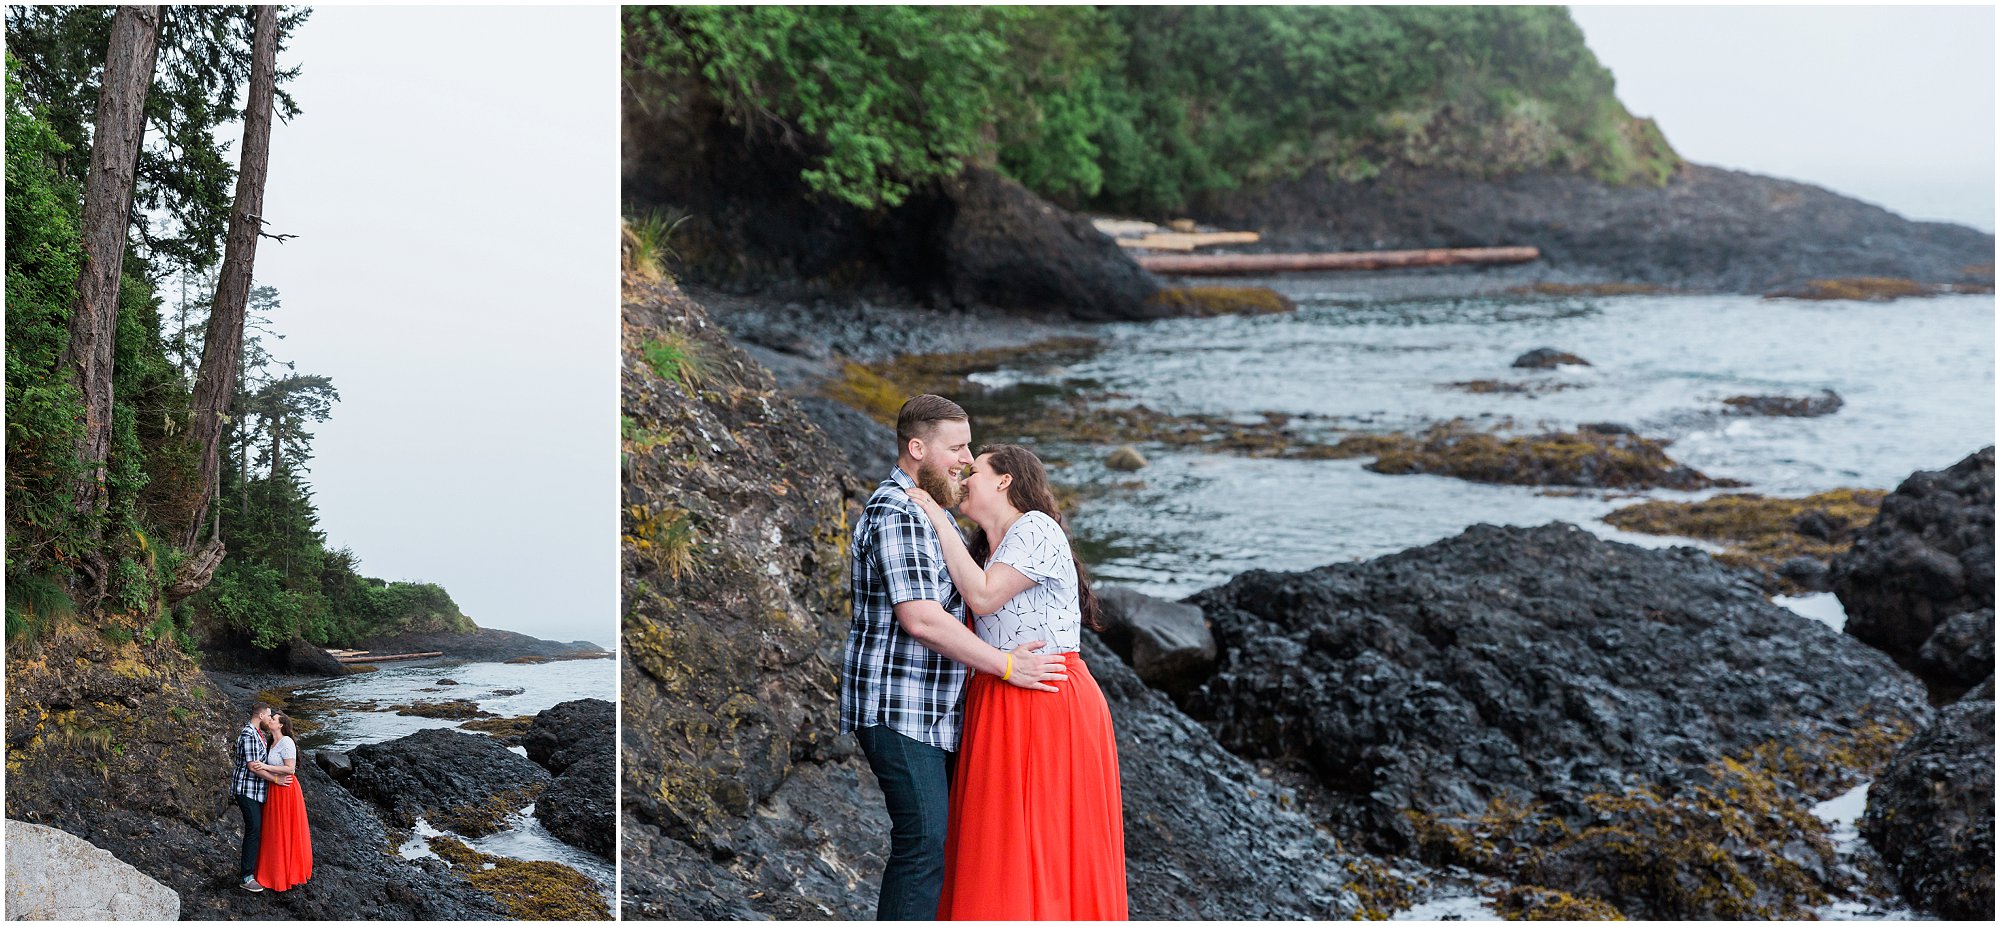 A perfect red flowy skirt pops against the greenery and foggy backdrop at this WA Coast adventure session by WA elopement photographer Erica Swantek. | Erica Swantek Photography